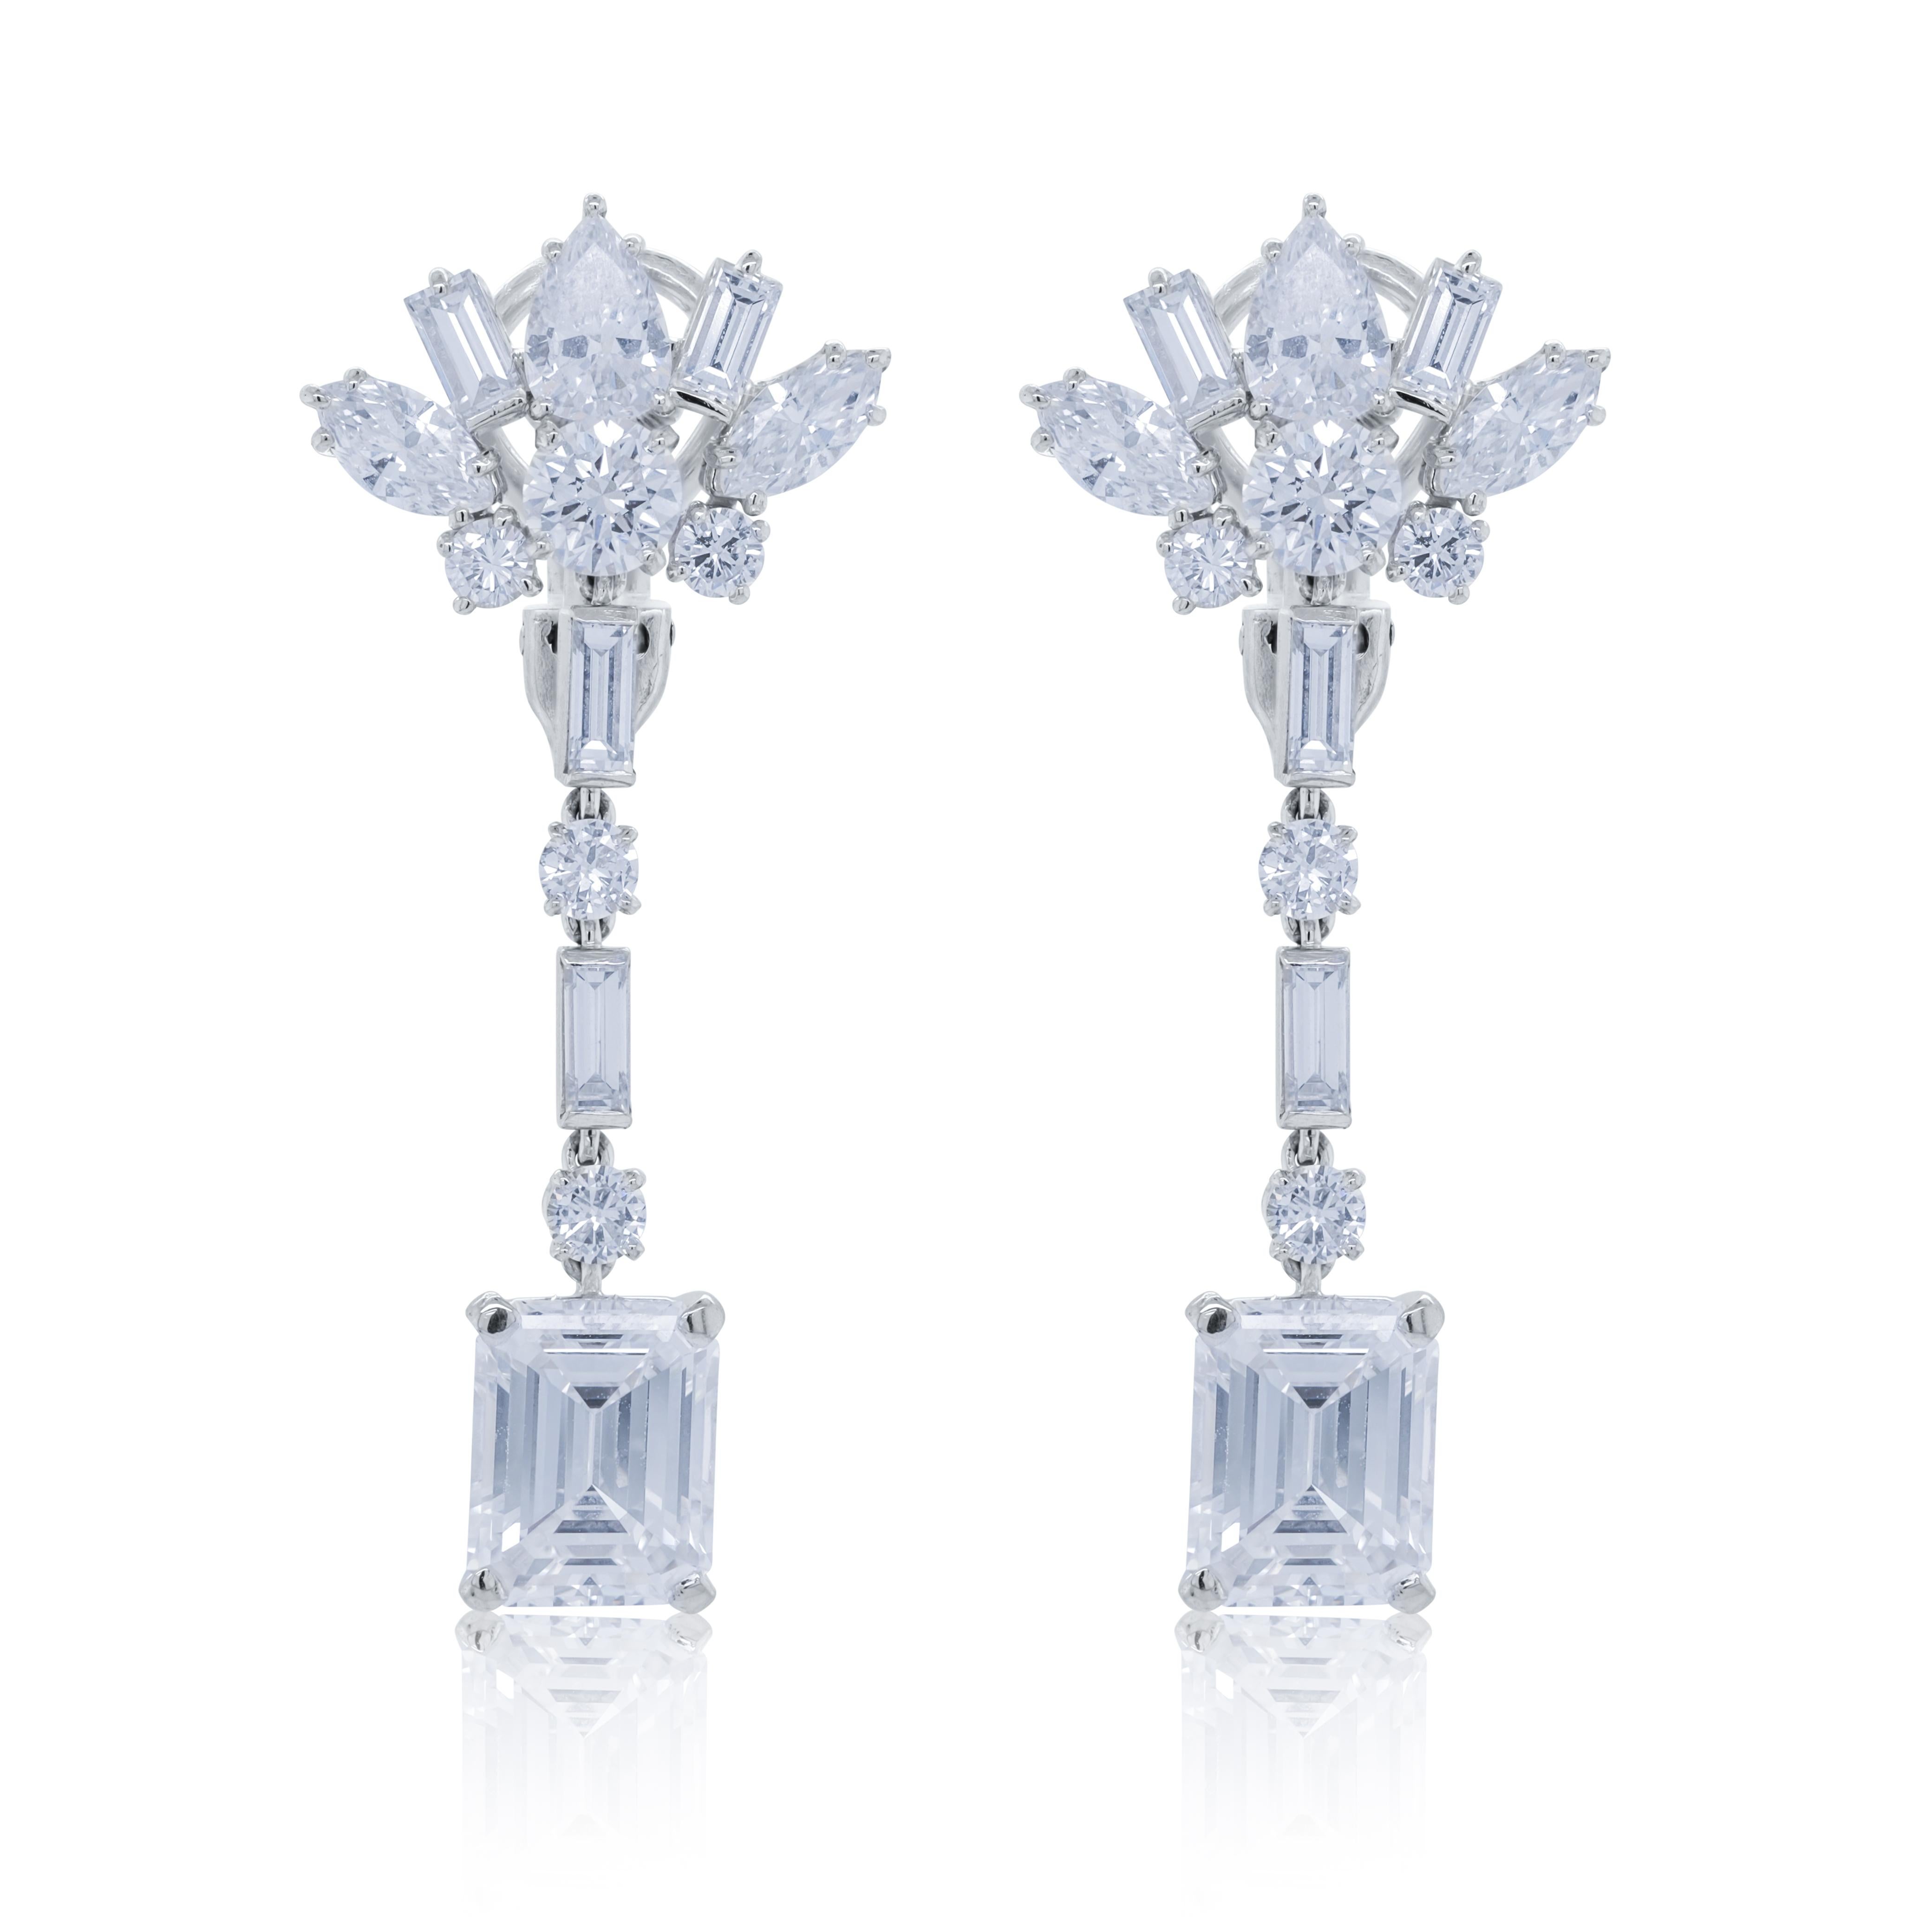 PLATINUM HAGNING EARRINGS  SET WITH GIA DIAMONDS 2.47CT E VVS2 AND 2.63 F IF 
EMERALD CUTS WITH MIXED DIAMONDS PEARS AND  MARQUIES 3.00CTS ADDITIONAL ON THEM 
Diana M is one-stop shop for all your jewelry shopping, carrying line of diamond rings,